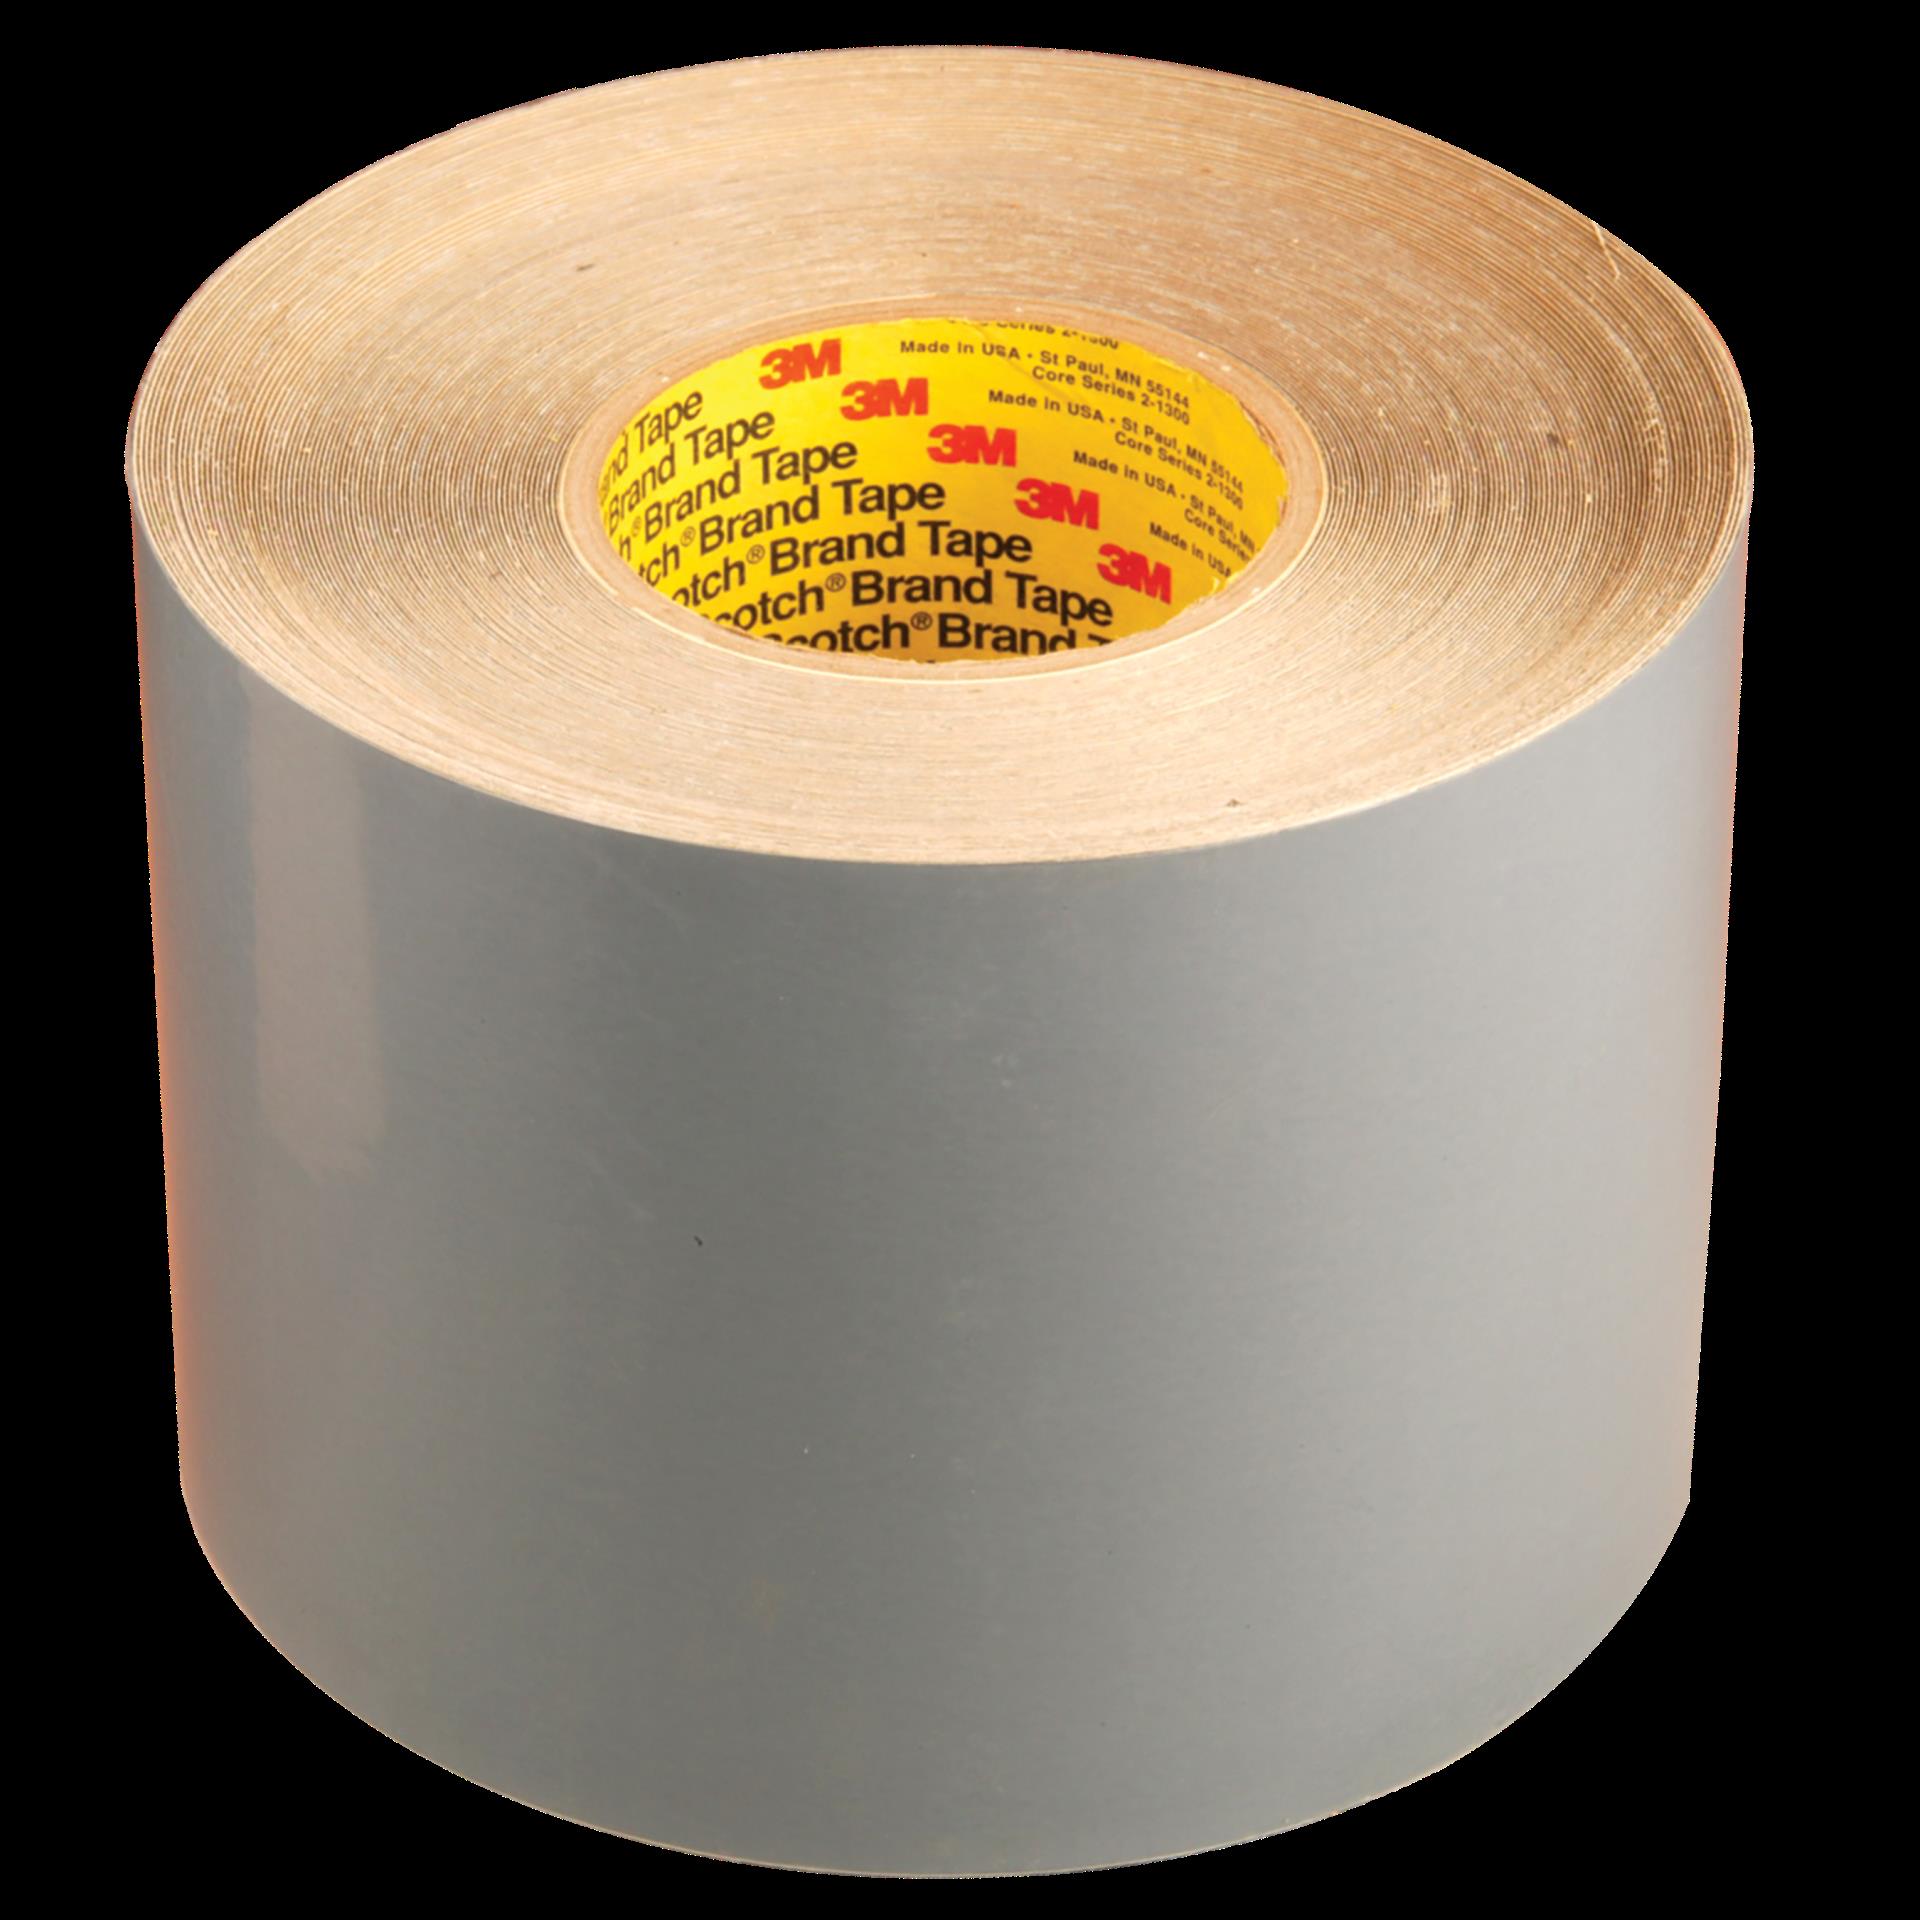 00021200383397 3M™ Flexomount™ Plate Mounting Tape 411DL, Gray, 36 in x  36 yd, 15 mil, roll per case Aircraft products  flexographic-plate-mounting-tapes 9381727